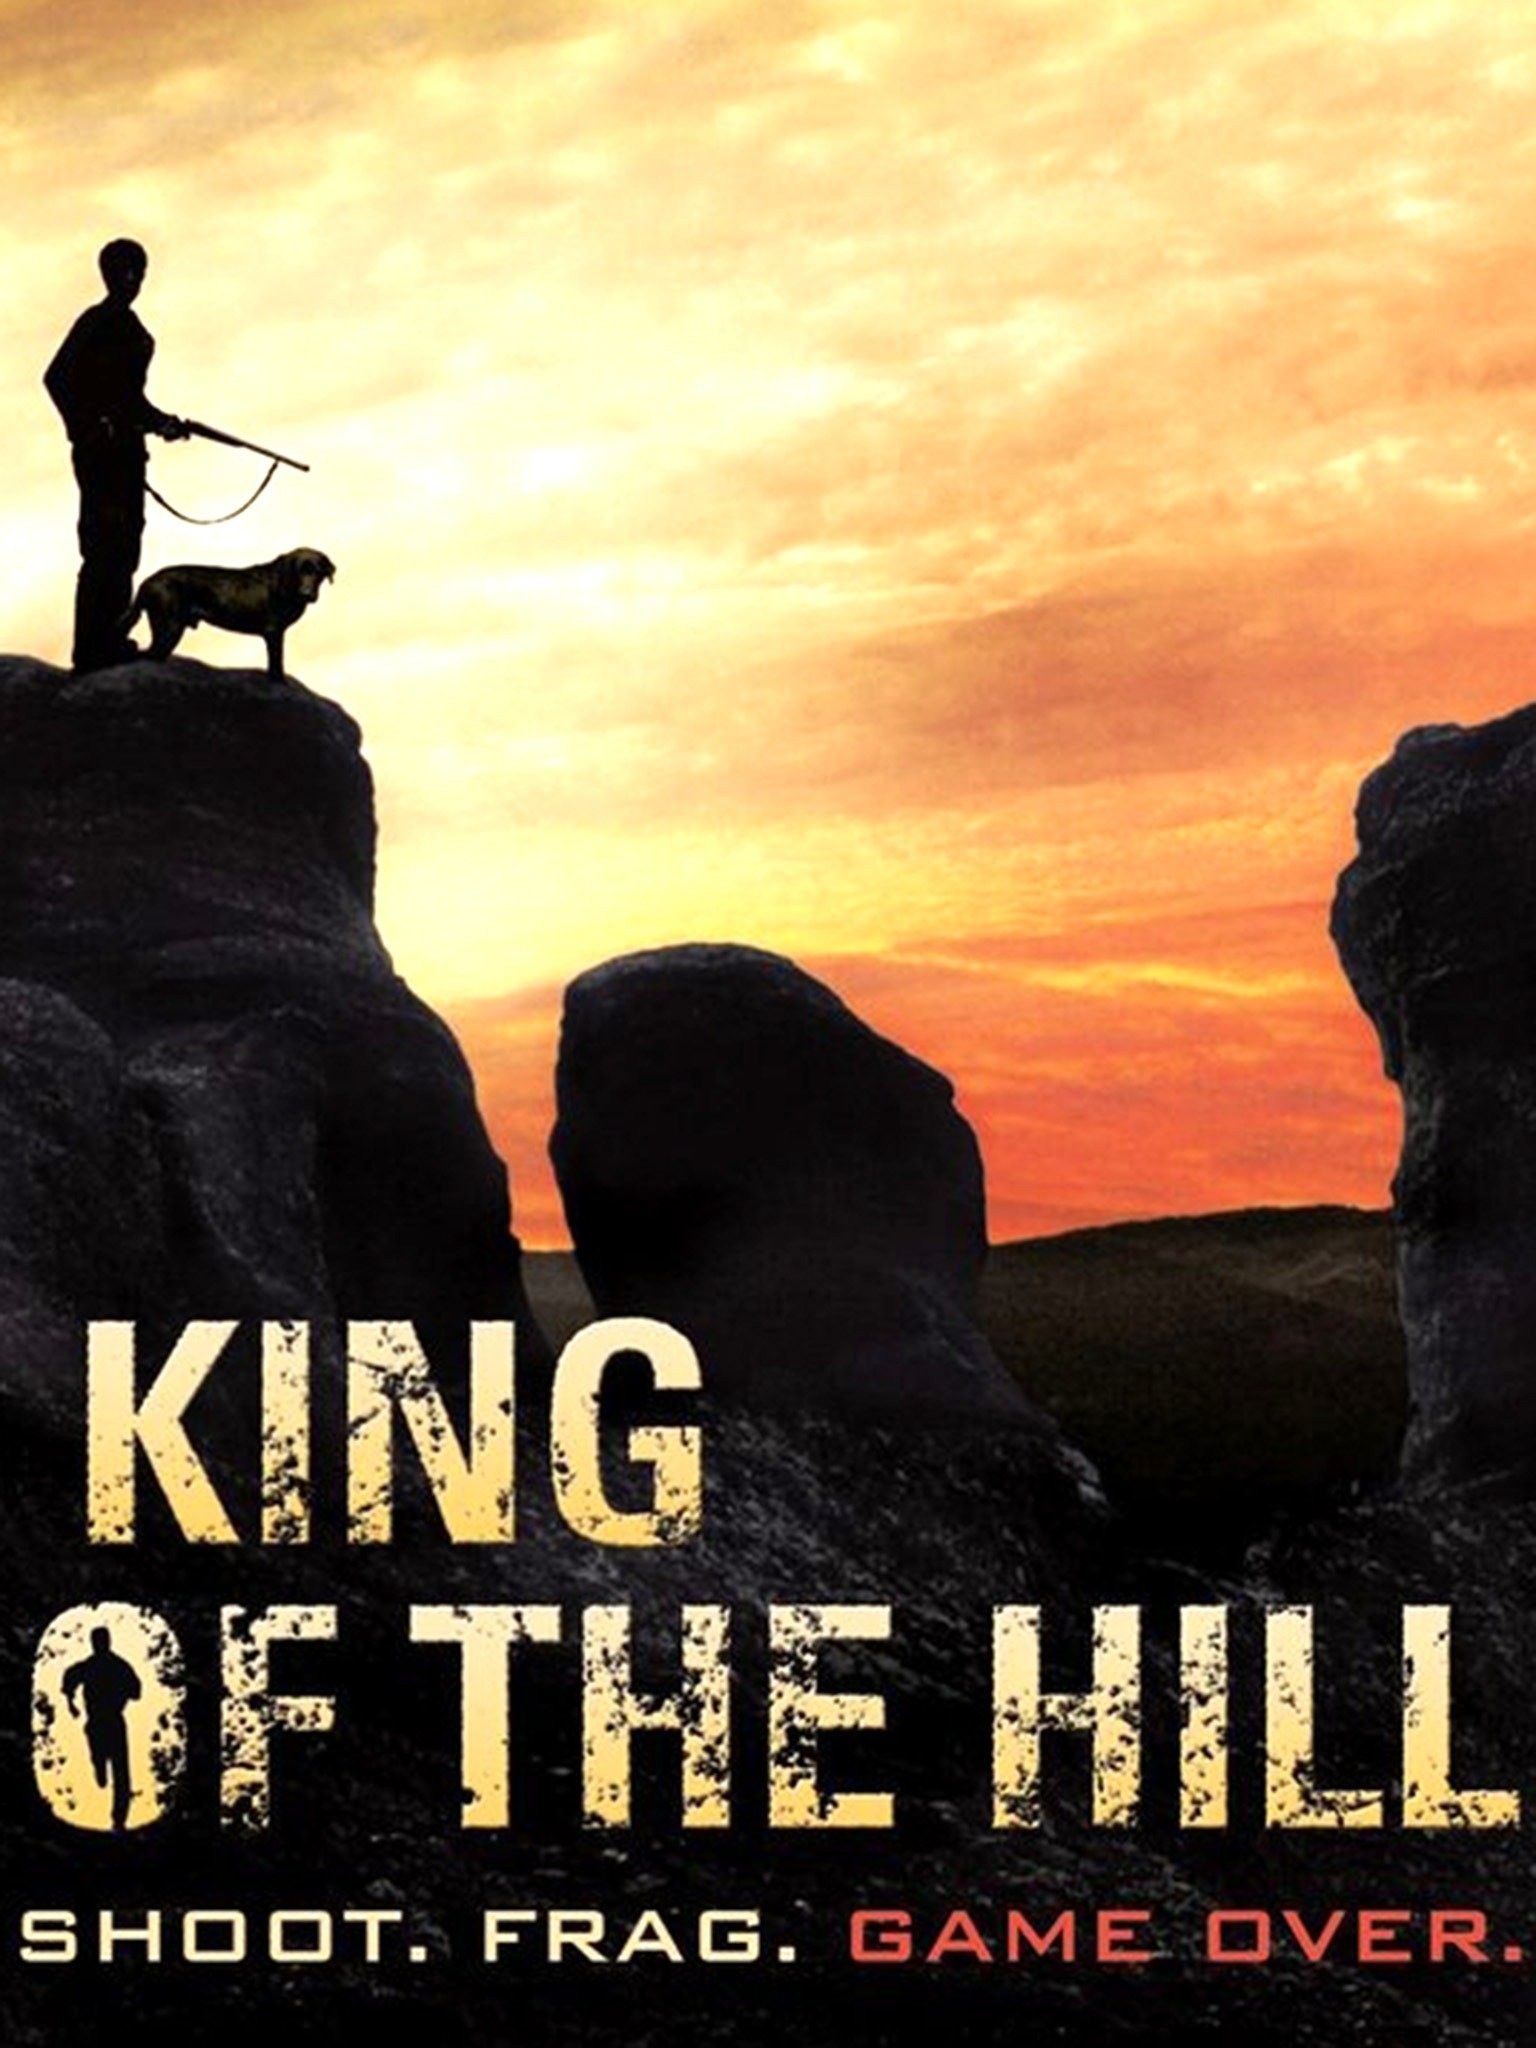 KING OF THE HILL free online game on